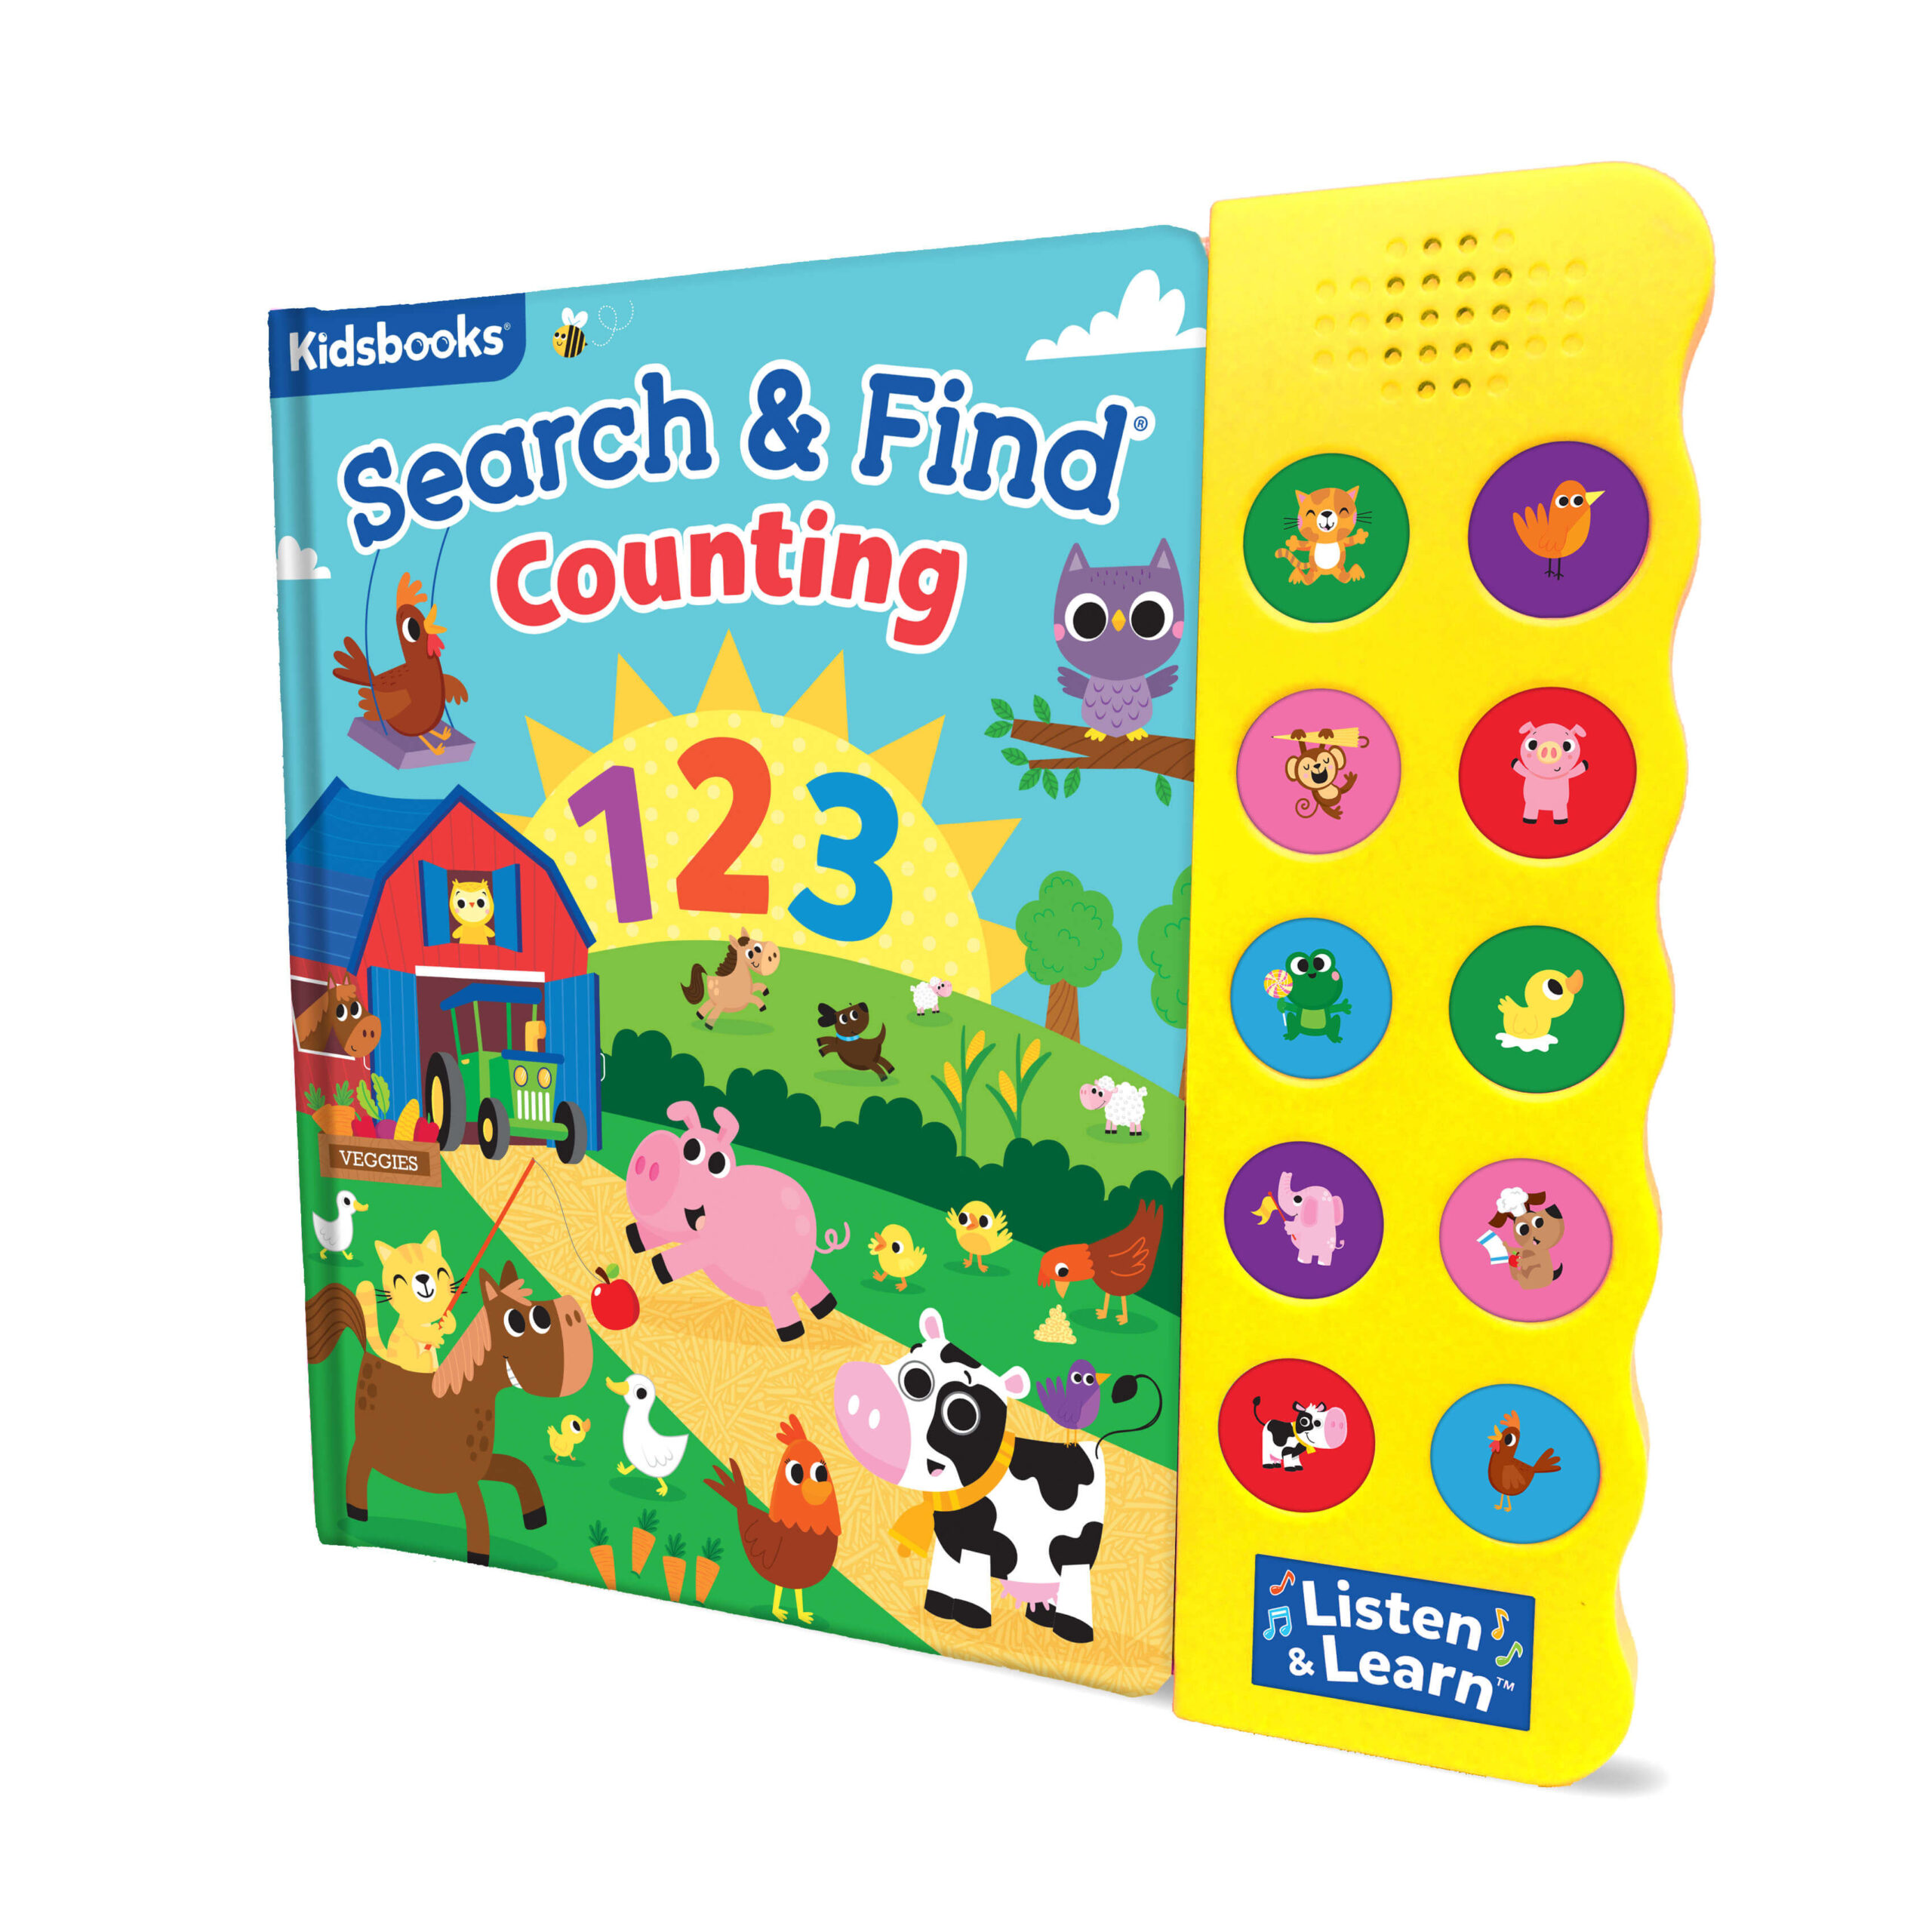 Search & Find: Counting